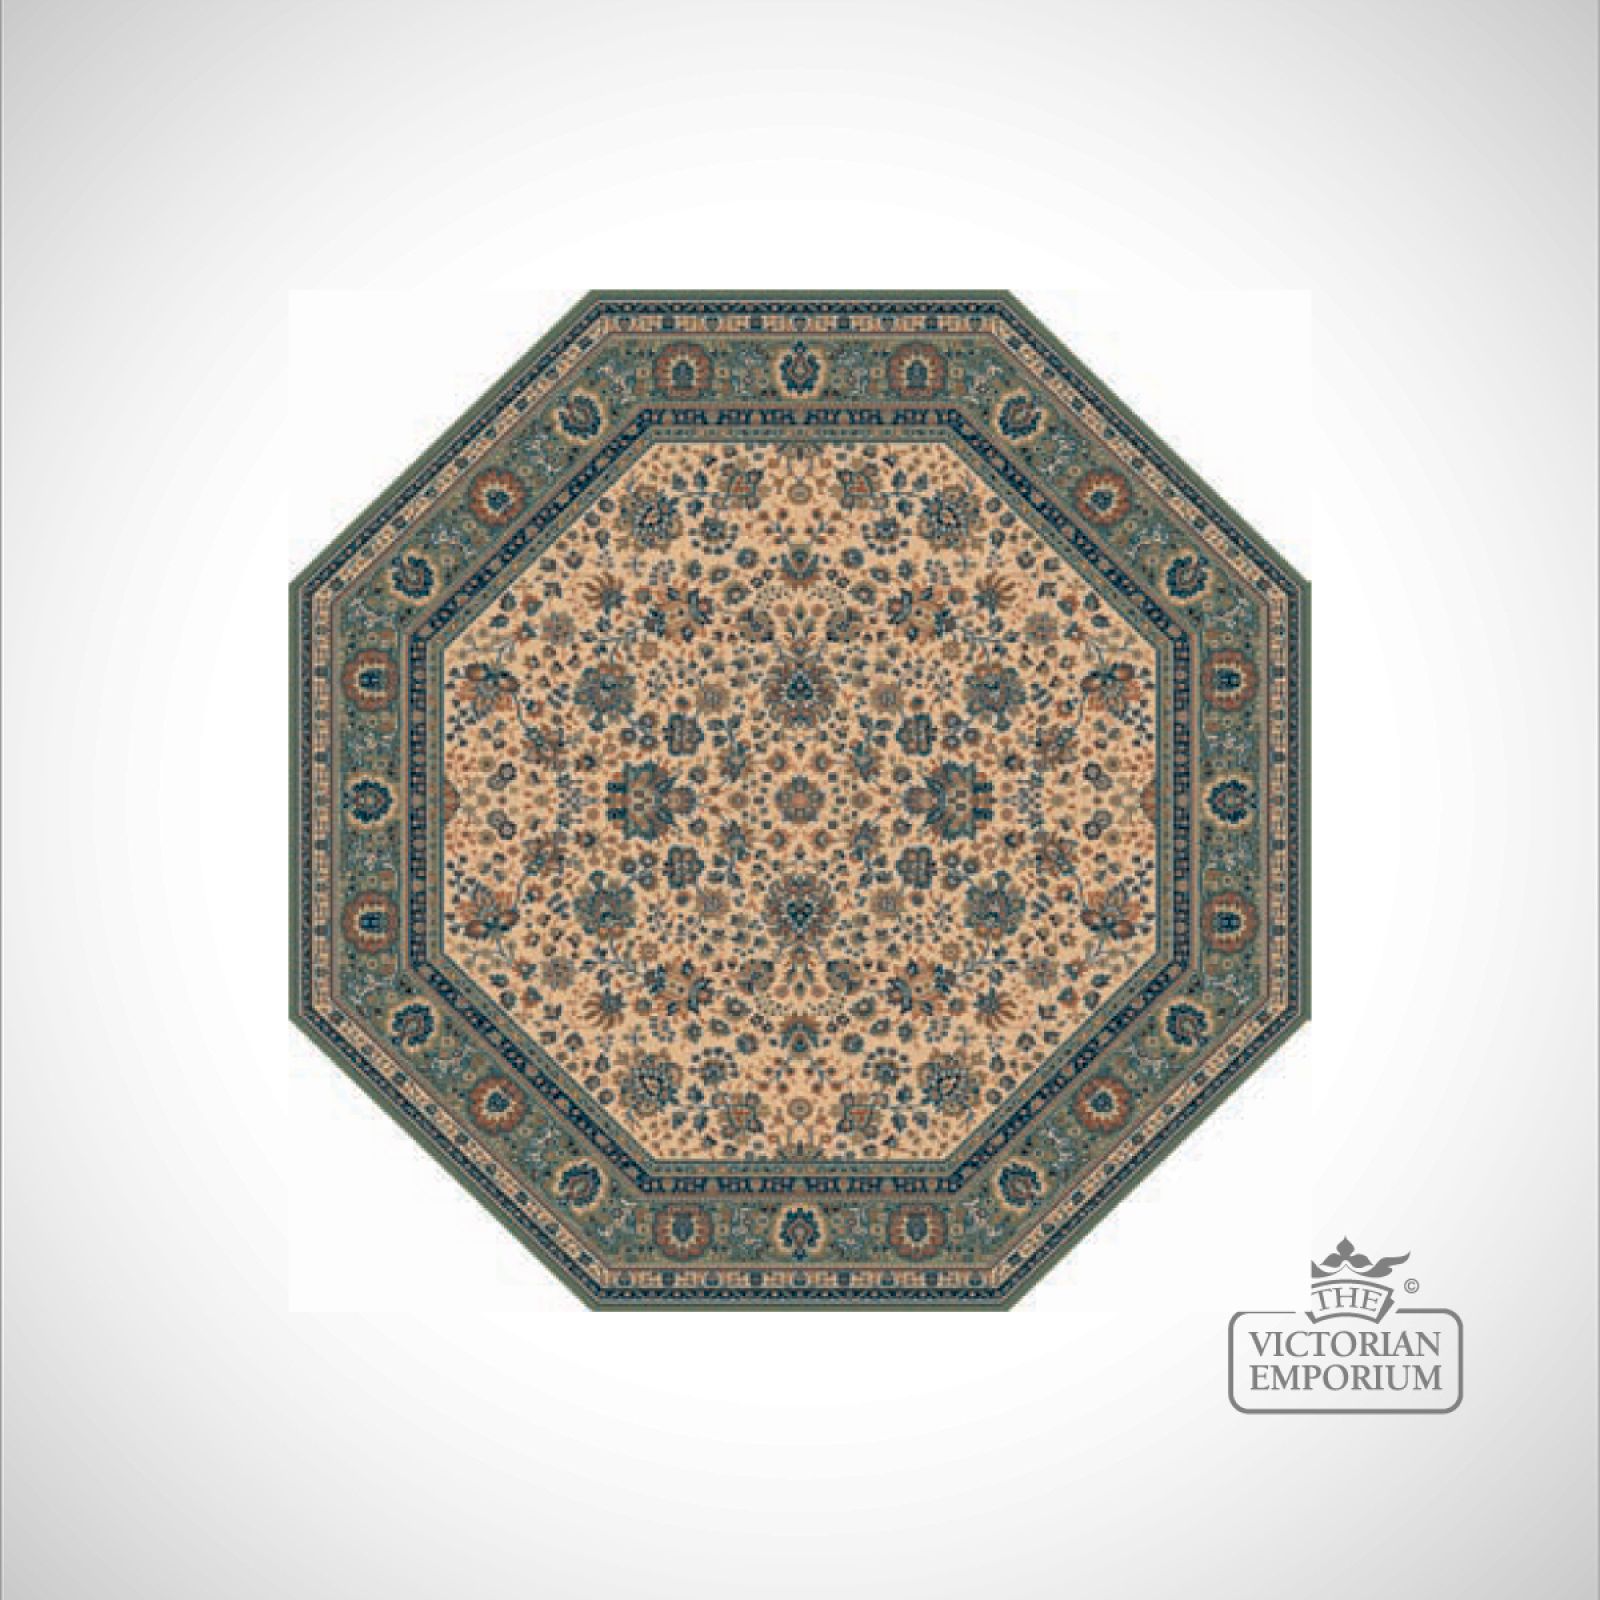 Octagonal Victorian Rug - style RO1516 in 3 different colourways